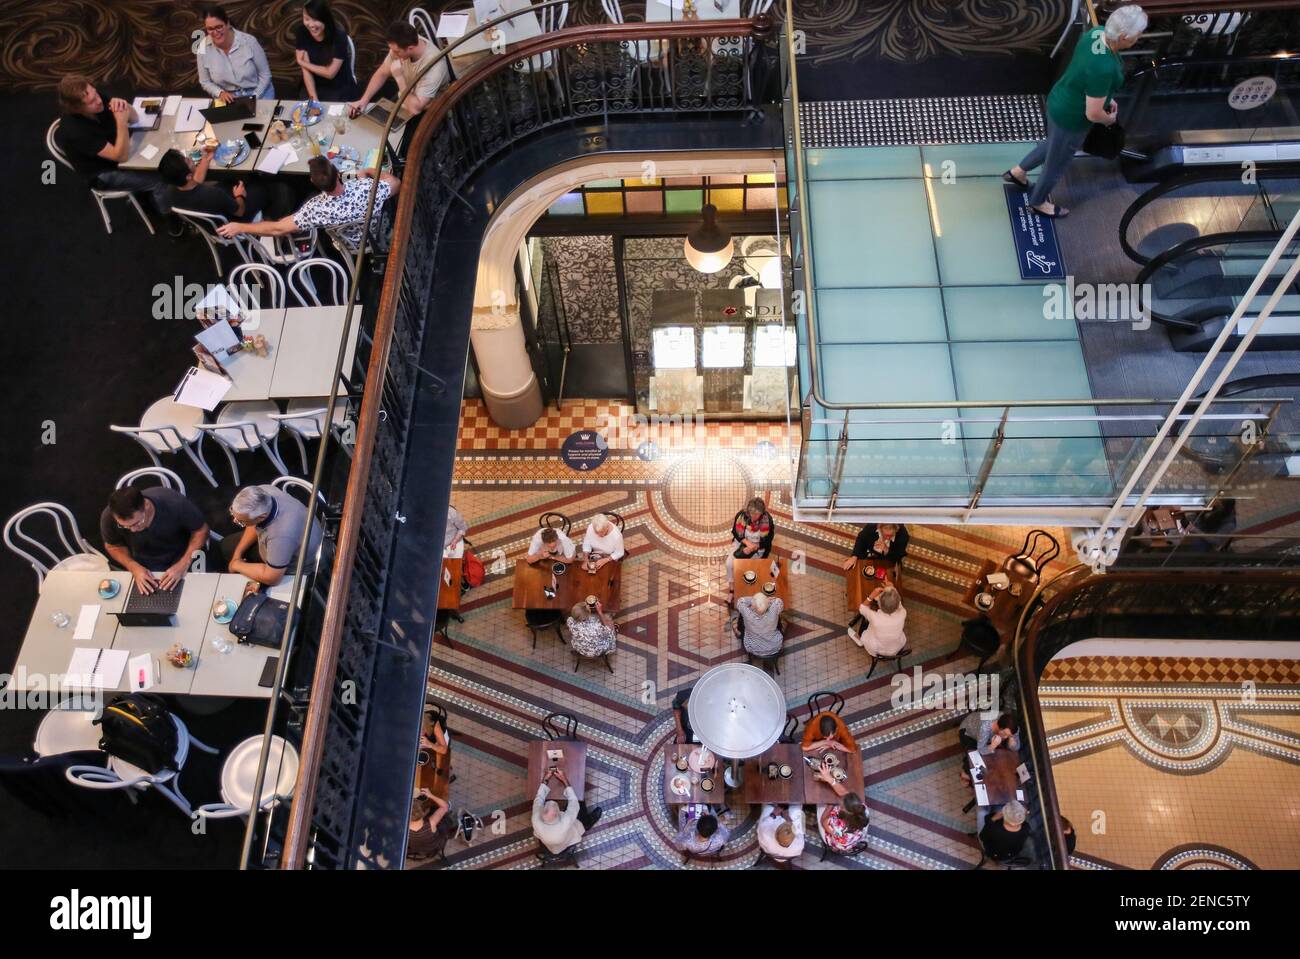 Sydney, Australia. 26th Feb, 2021. People rest in a cafe in Sydney, Australia, on Feb. 26, 2021. Restrictions in the Australian state of New South Wales (NSW) will further ease from Friday as vaccination rolled out and 'no local case' status continued. Credit: Bai Xuefei/Xinhua/Alamy Live News Stock Photo